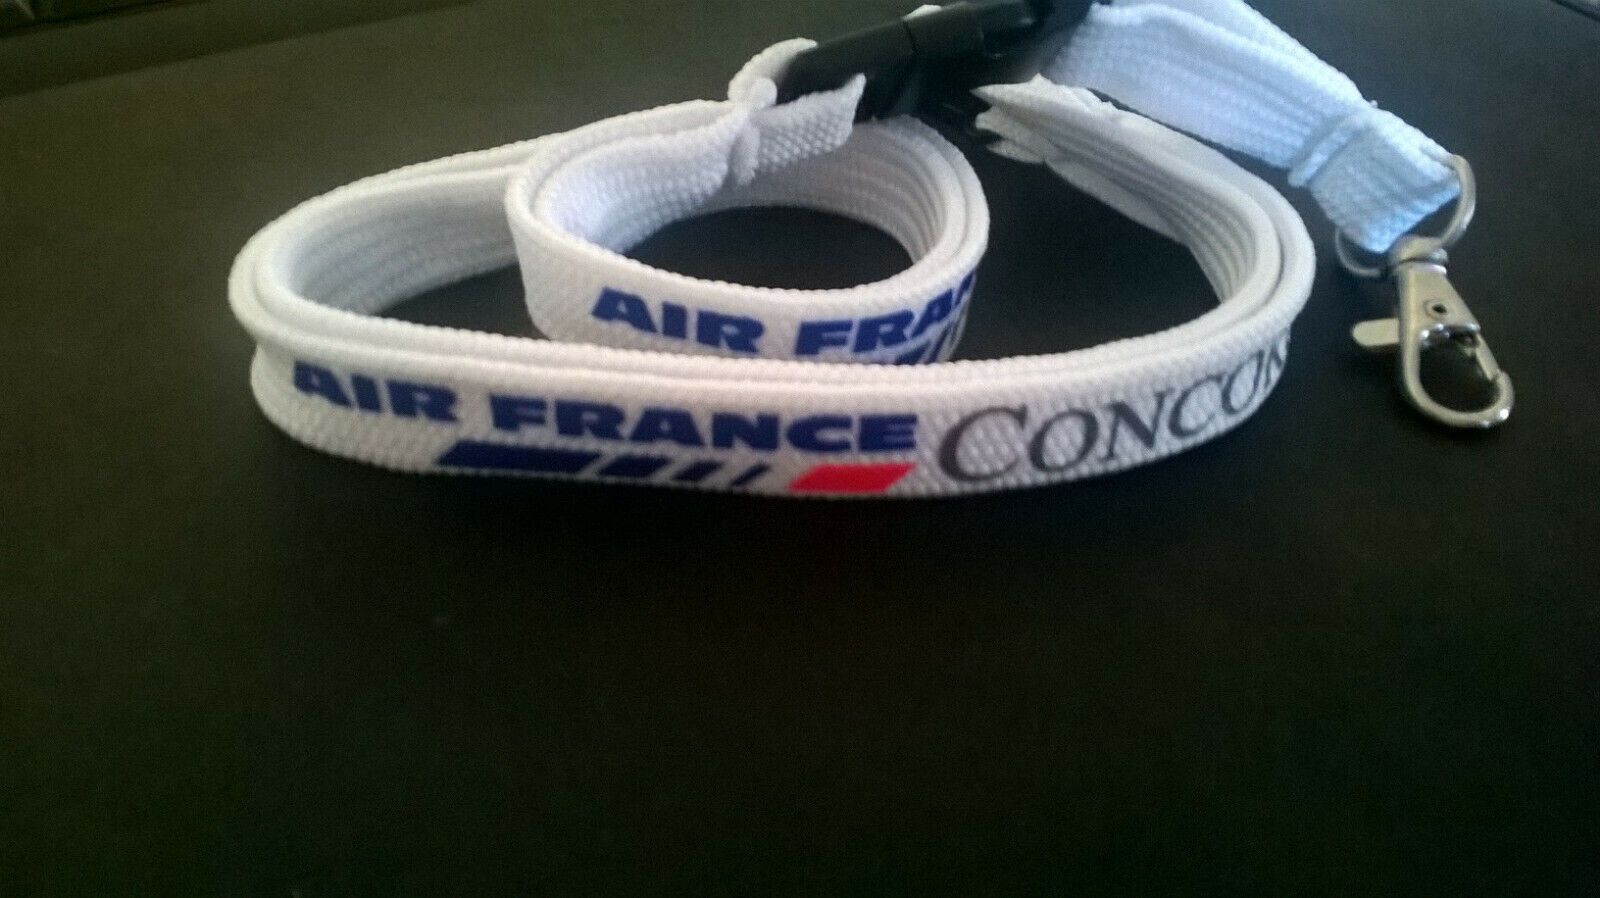 AIR FRANCE - CONCORDE LANYARD for ID card